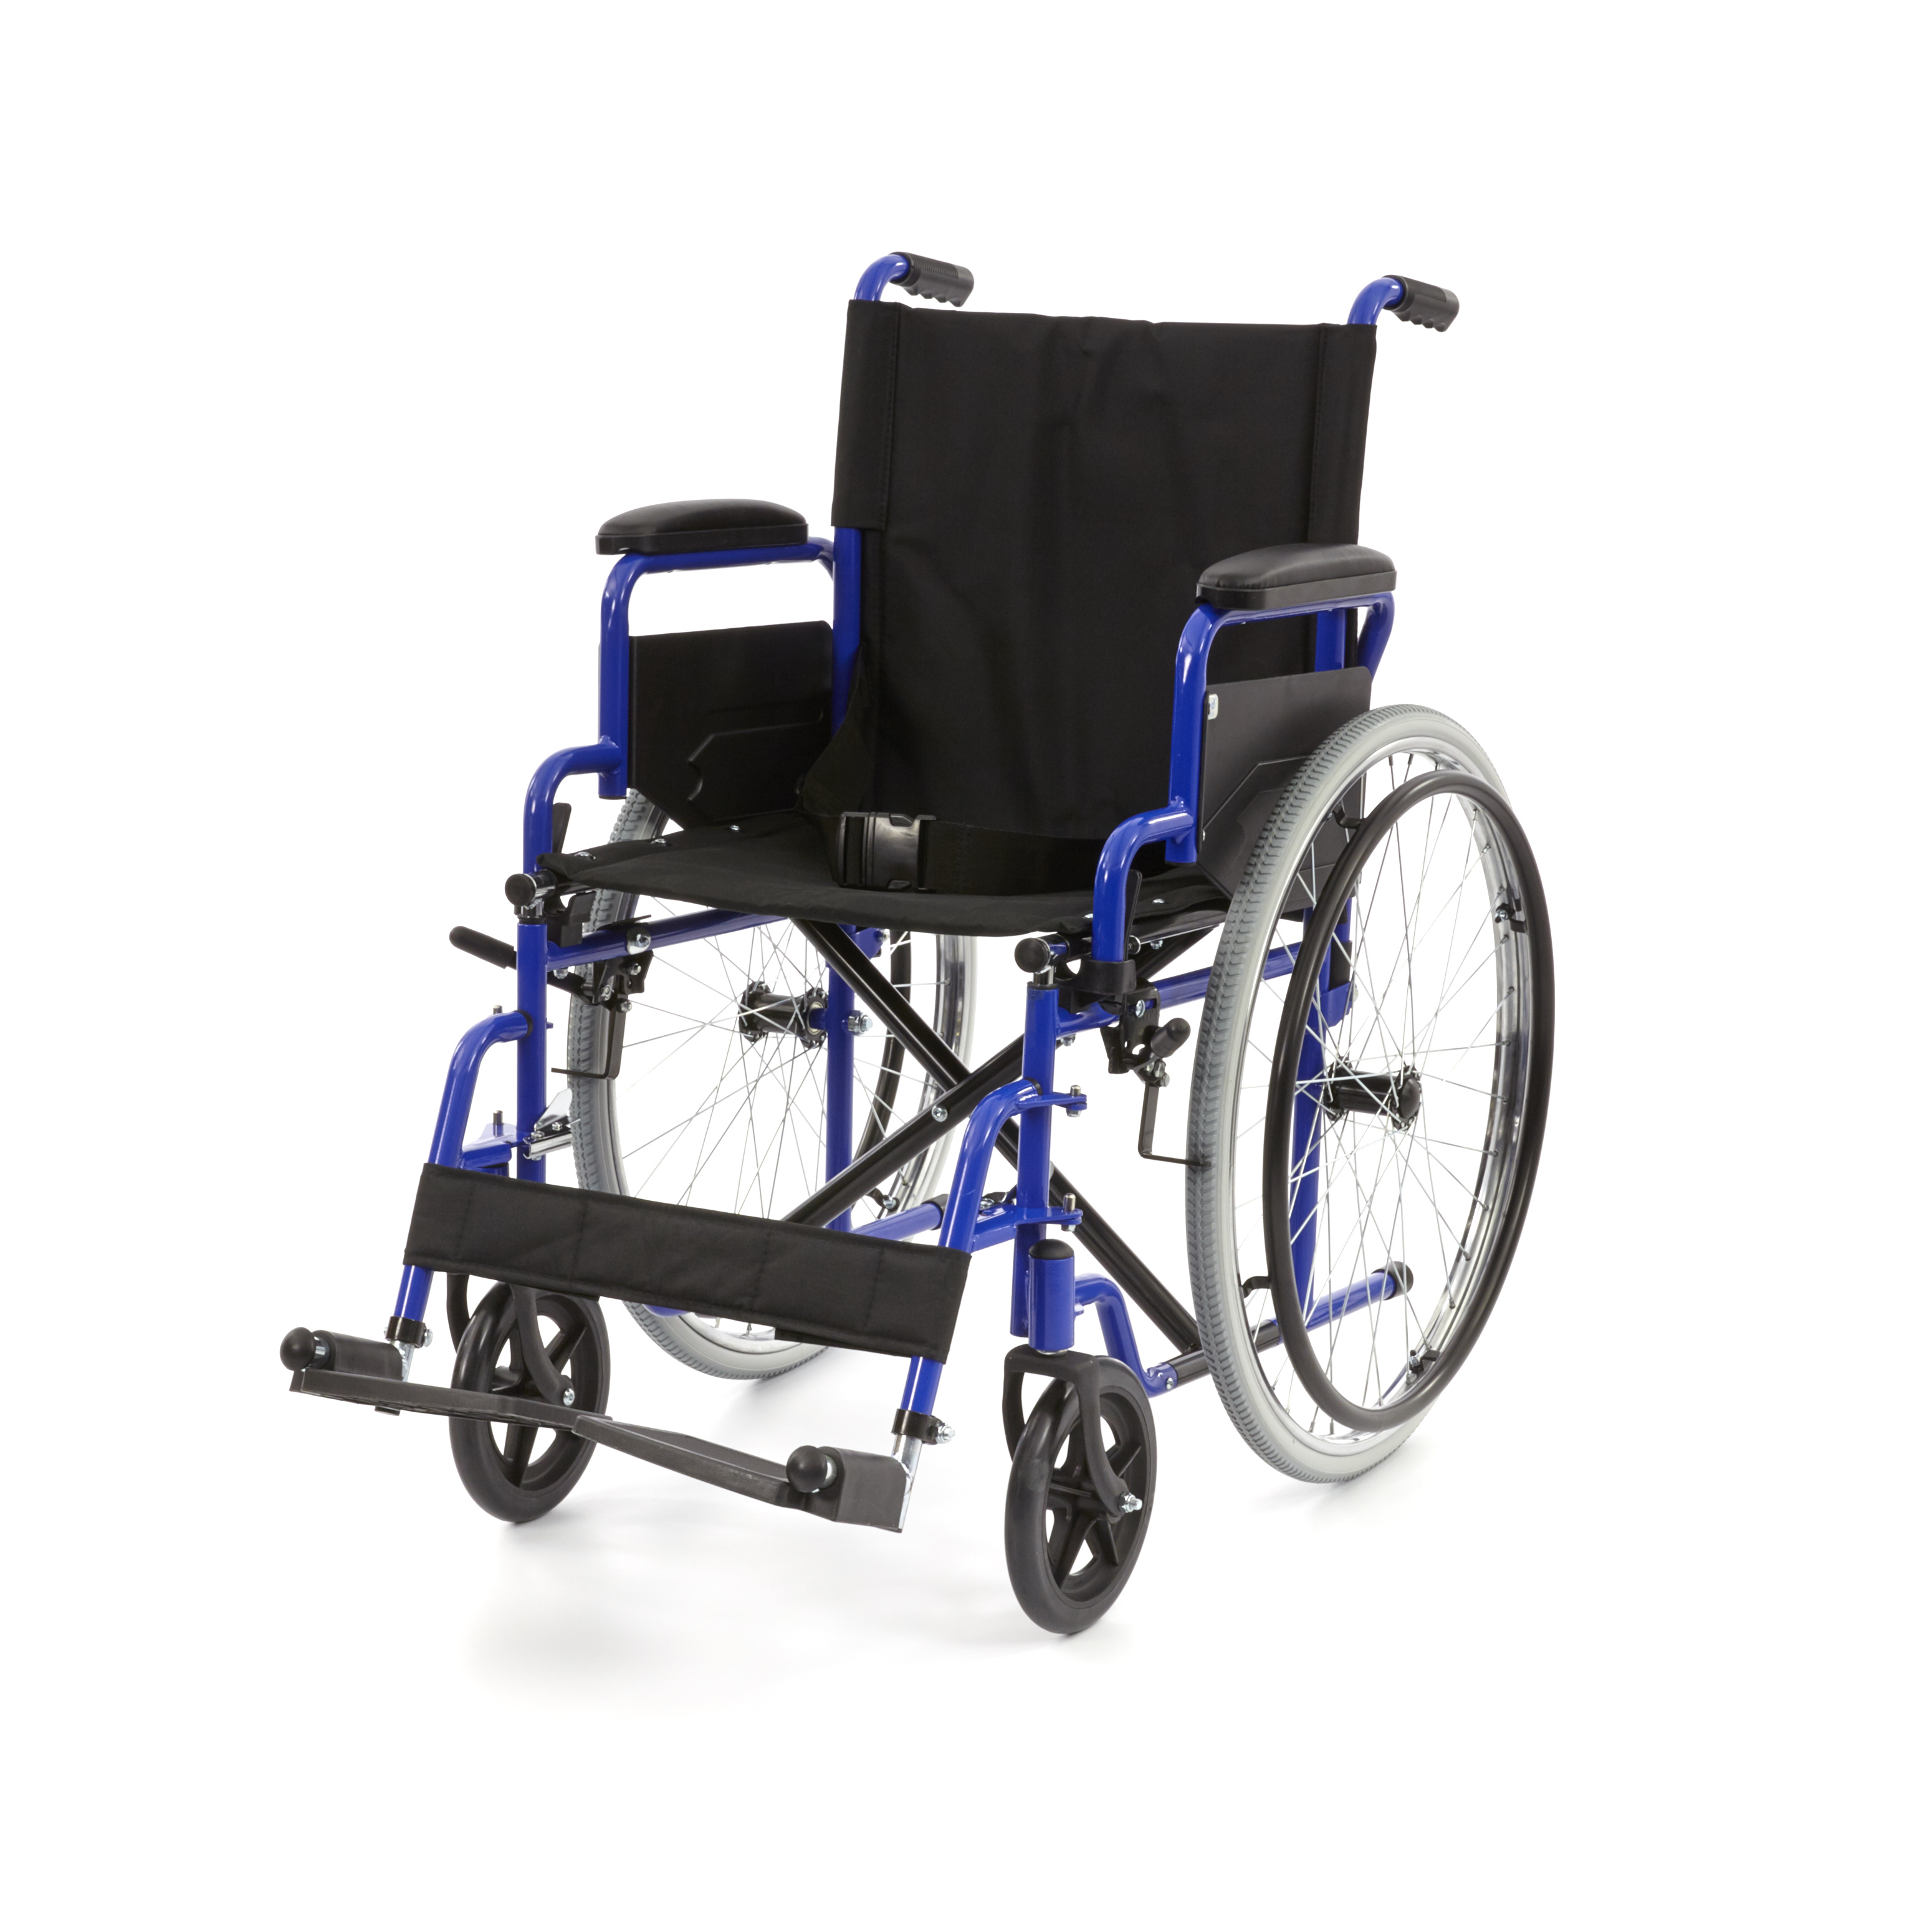 WHE-01-BLUE Romed foldable manual wheelchair, blue, with flip-up armrest and swing away footrest, per piece in a carton.